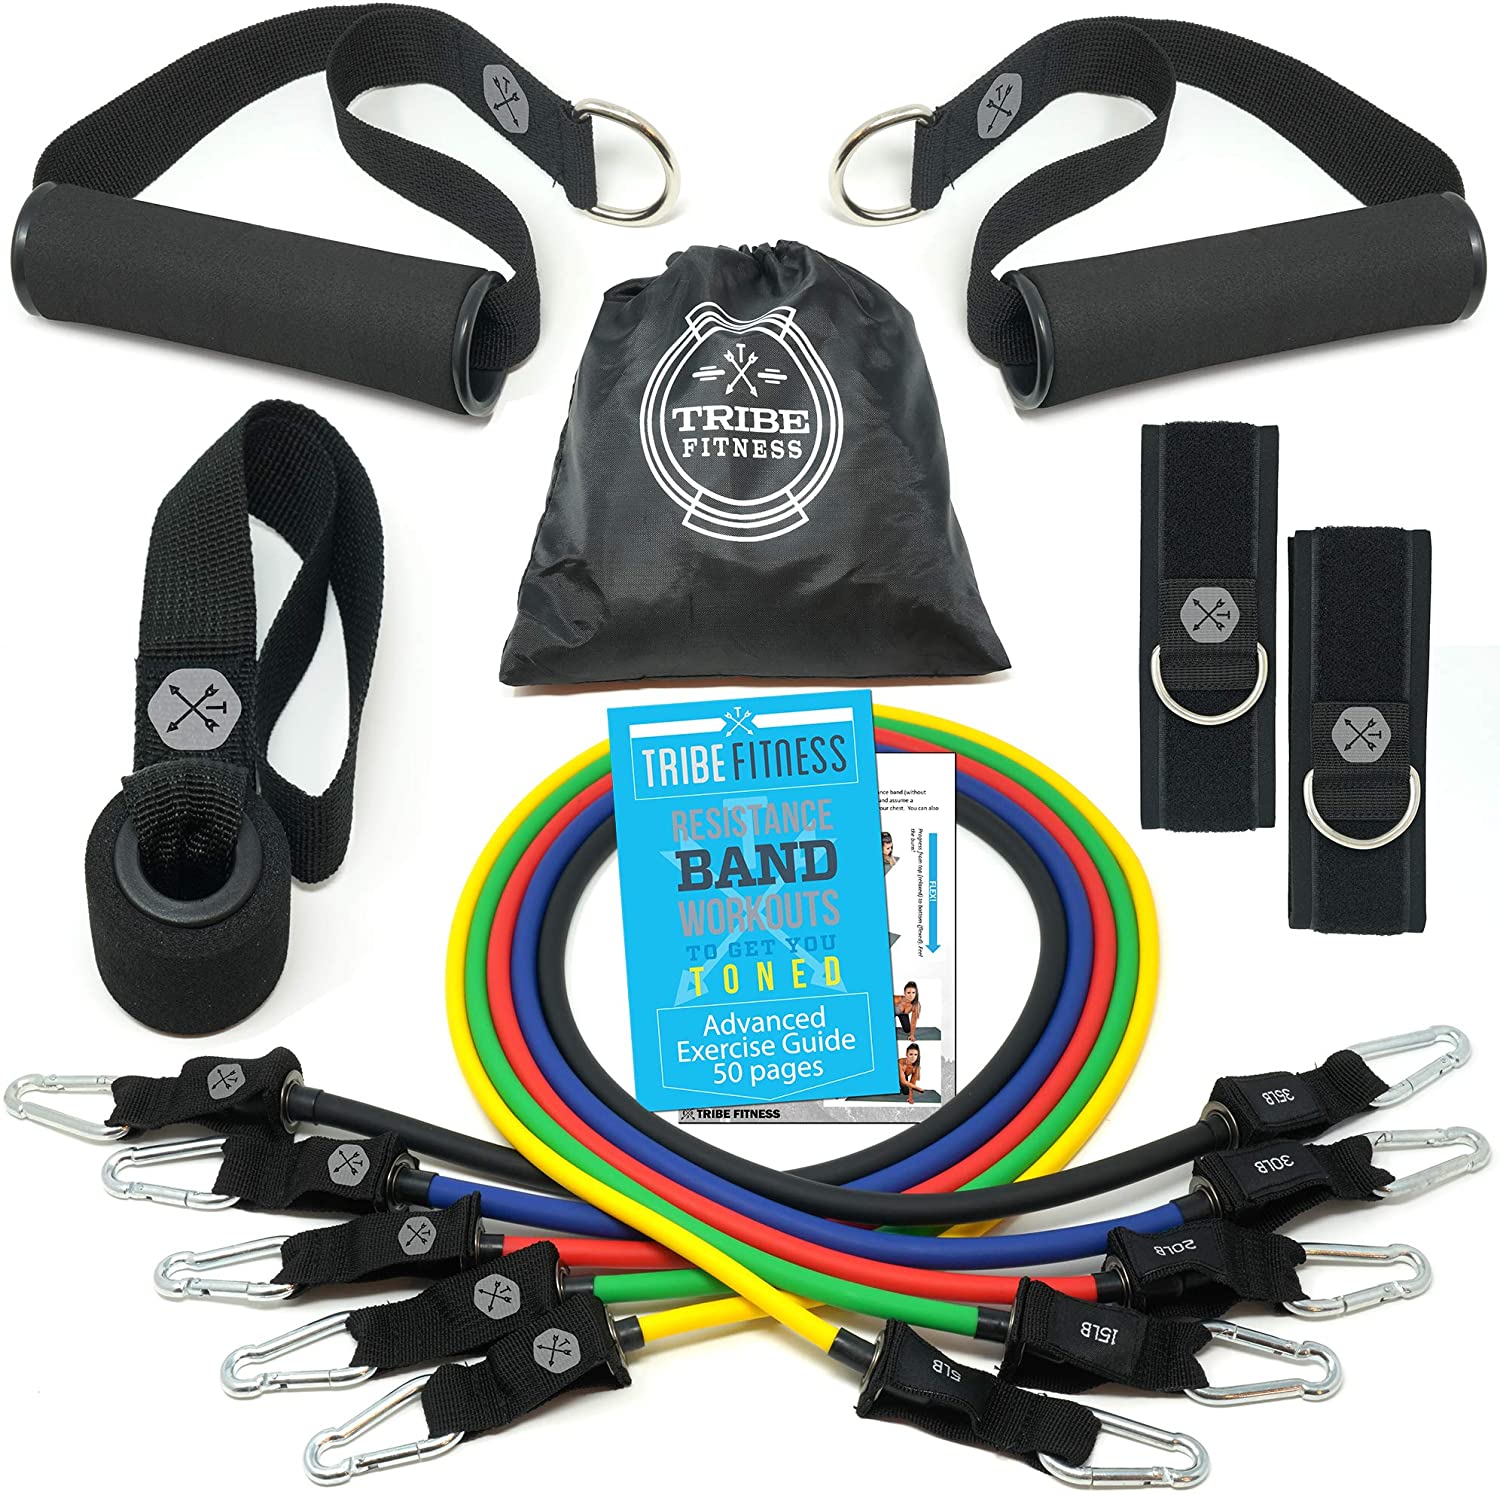 Premium 11pc Resistance Band Set - For Any Resistance Training and Home Workouts